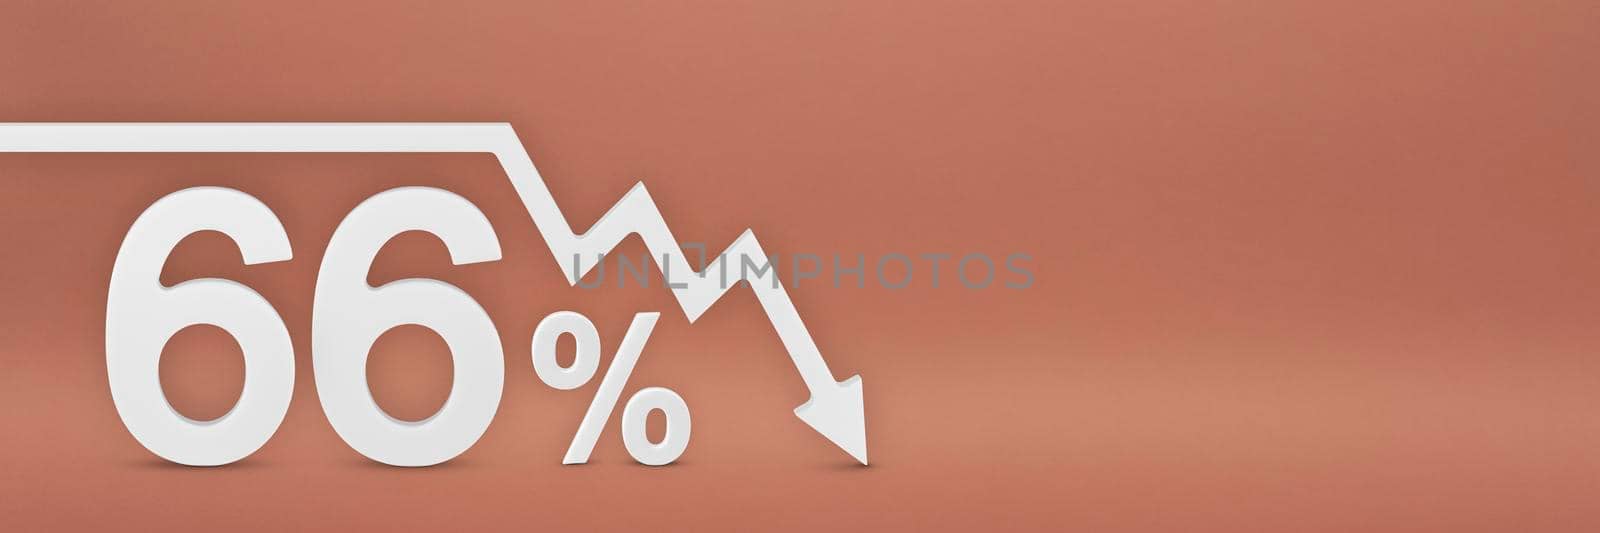 sixty-six percent, the arrow on the graph is pointing down. Stock market crash, bear market, inflation.Economic collapse, collapse of stocks.3d banner,66 percent discount sign on a red background